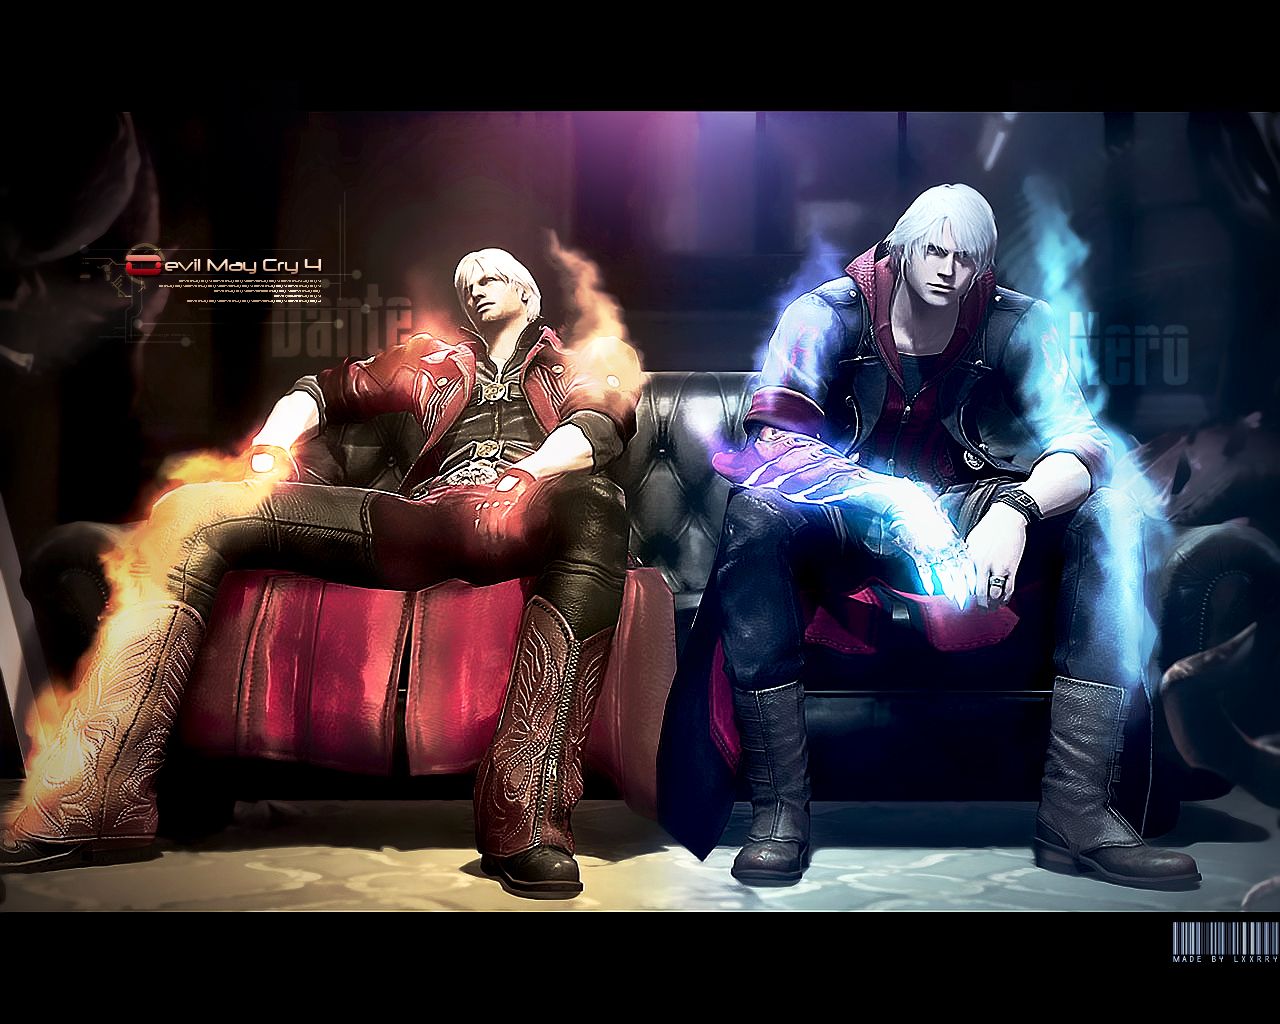 Devil May Cry 4 Wallpaper 01 by squishless on DeviantArt